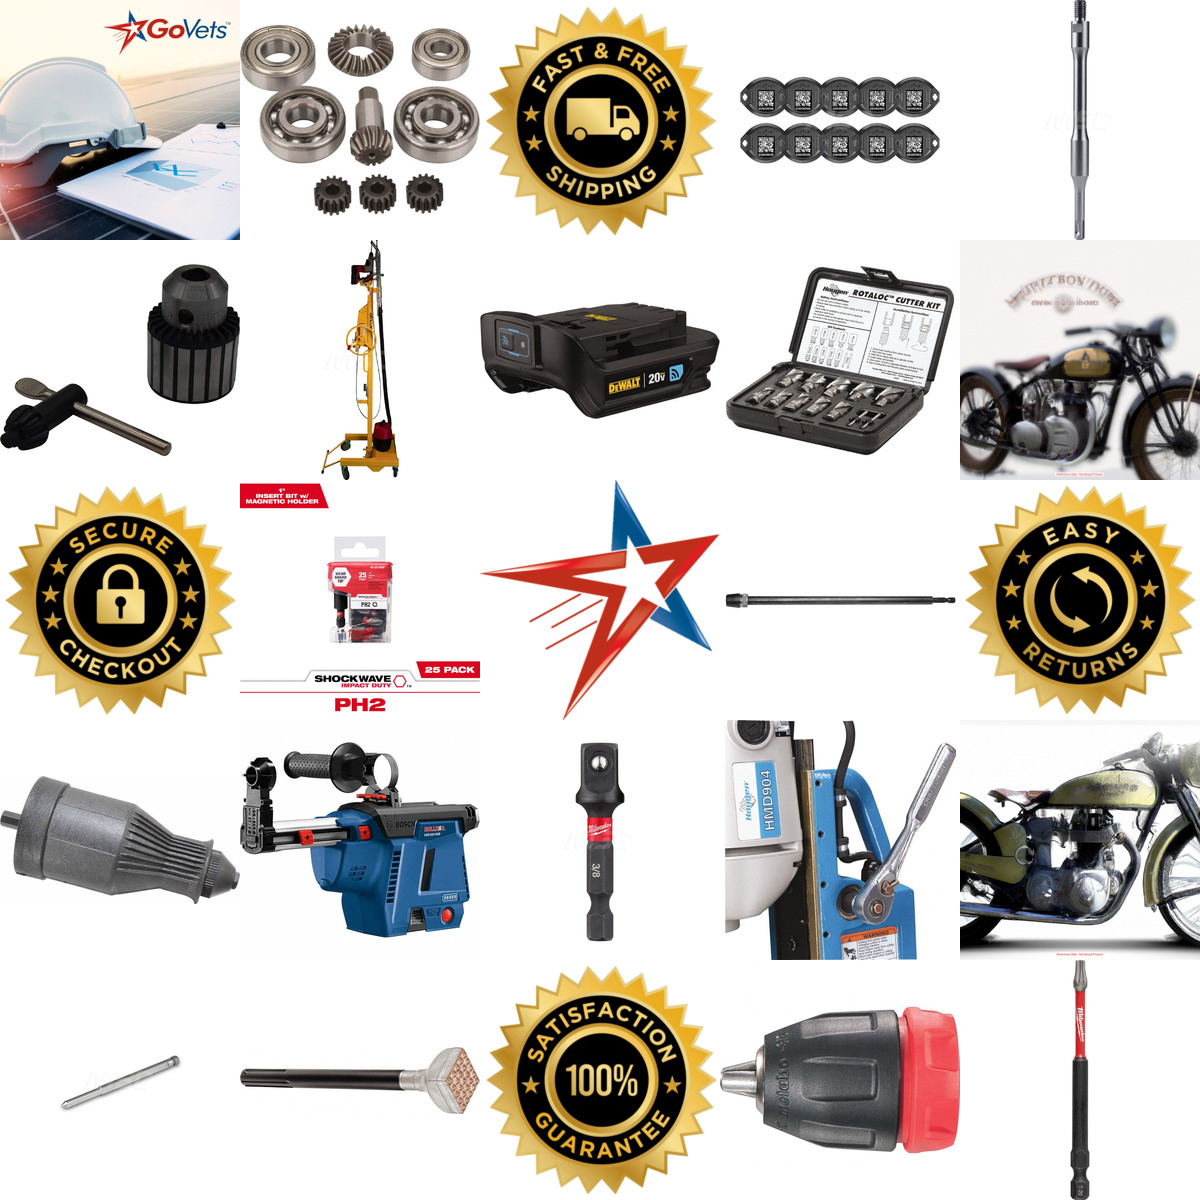 A selection of Power Drill Accessories products on GoVets